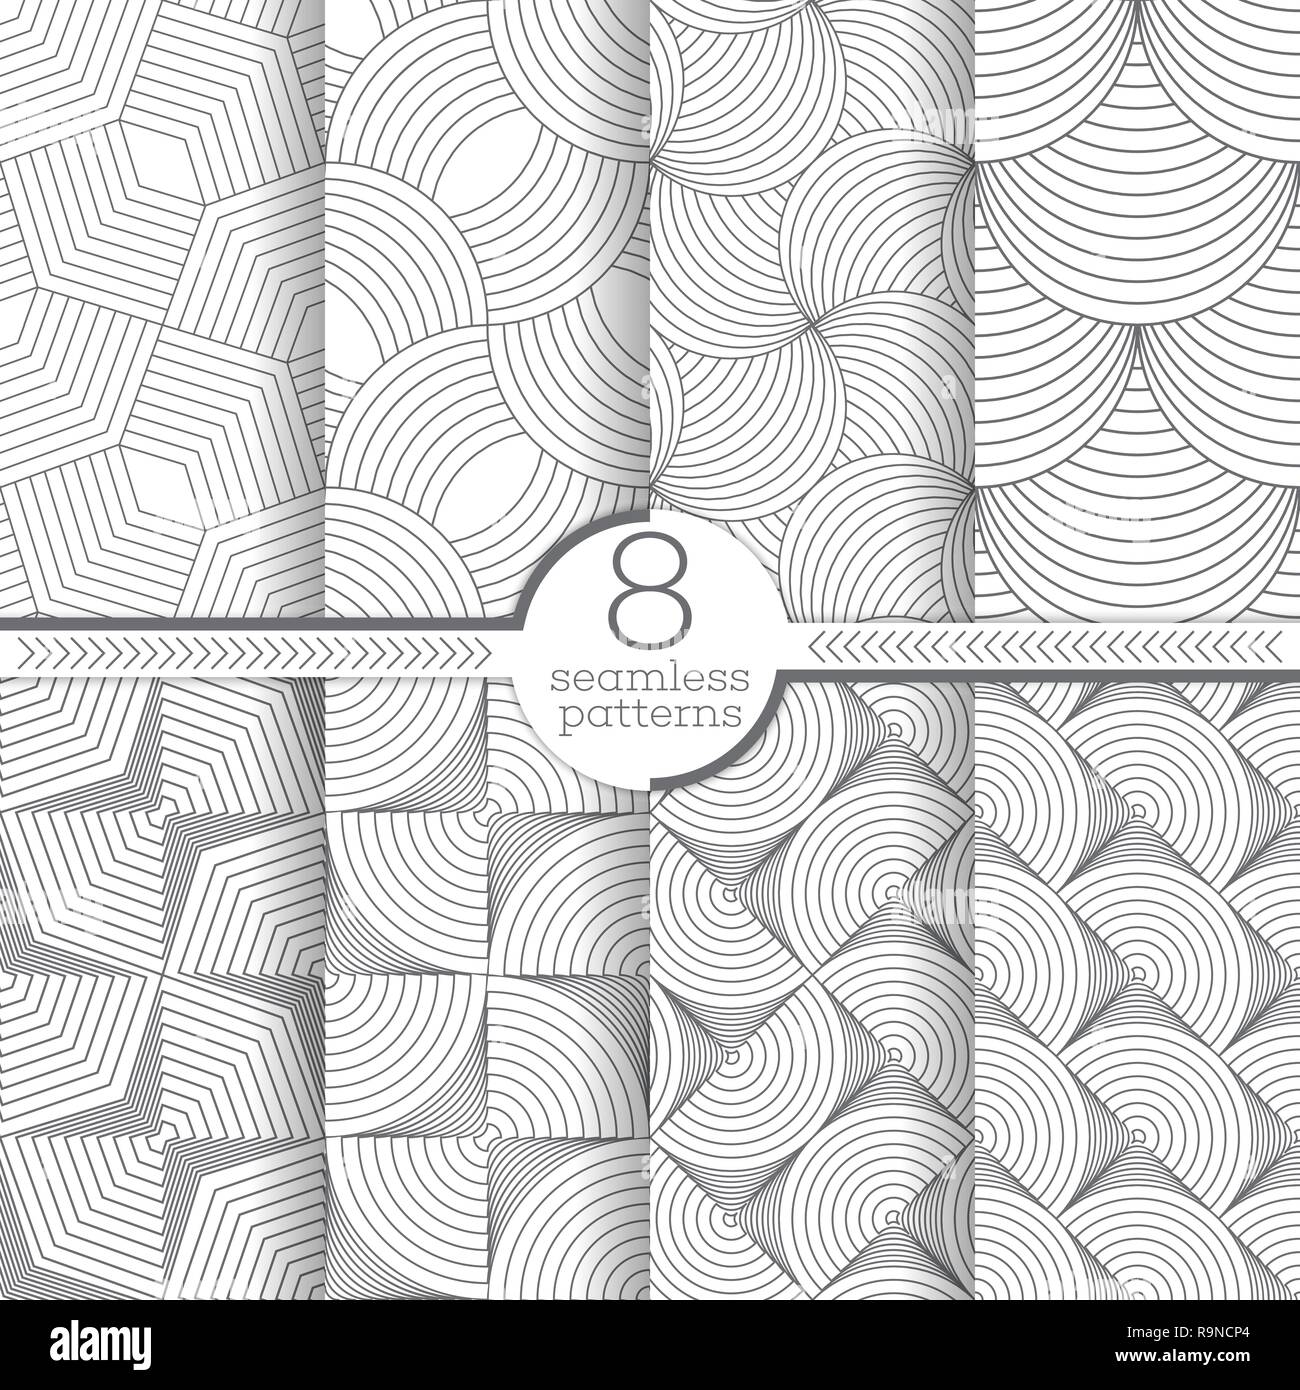 Set of vector seamless patterns. Stylish modern geometric textures. Regularly repeating geometrical seamless backgrounds with thin lines. Stock Vector